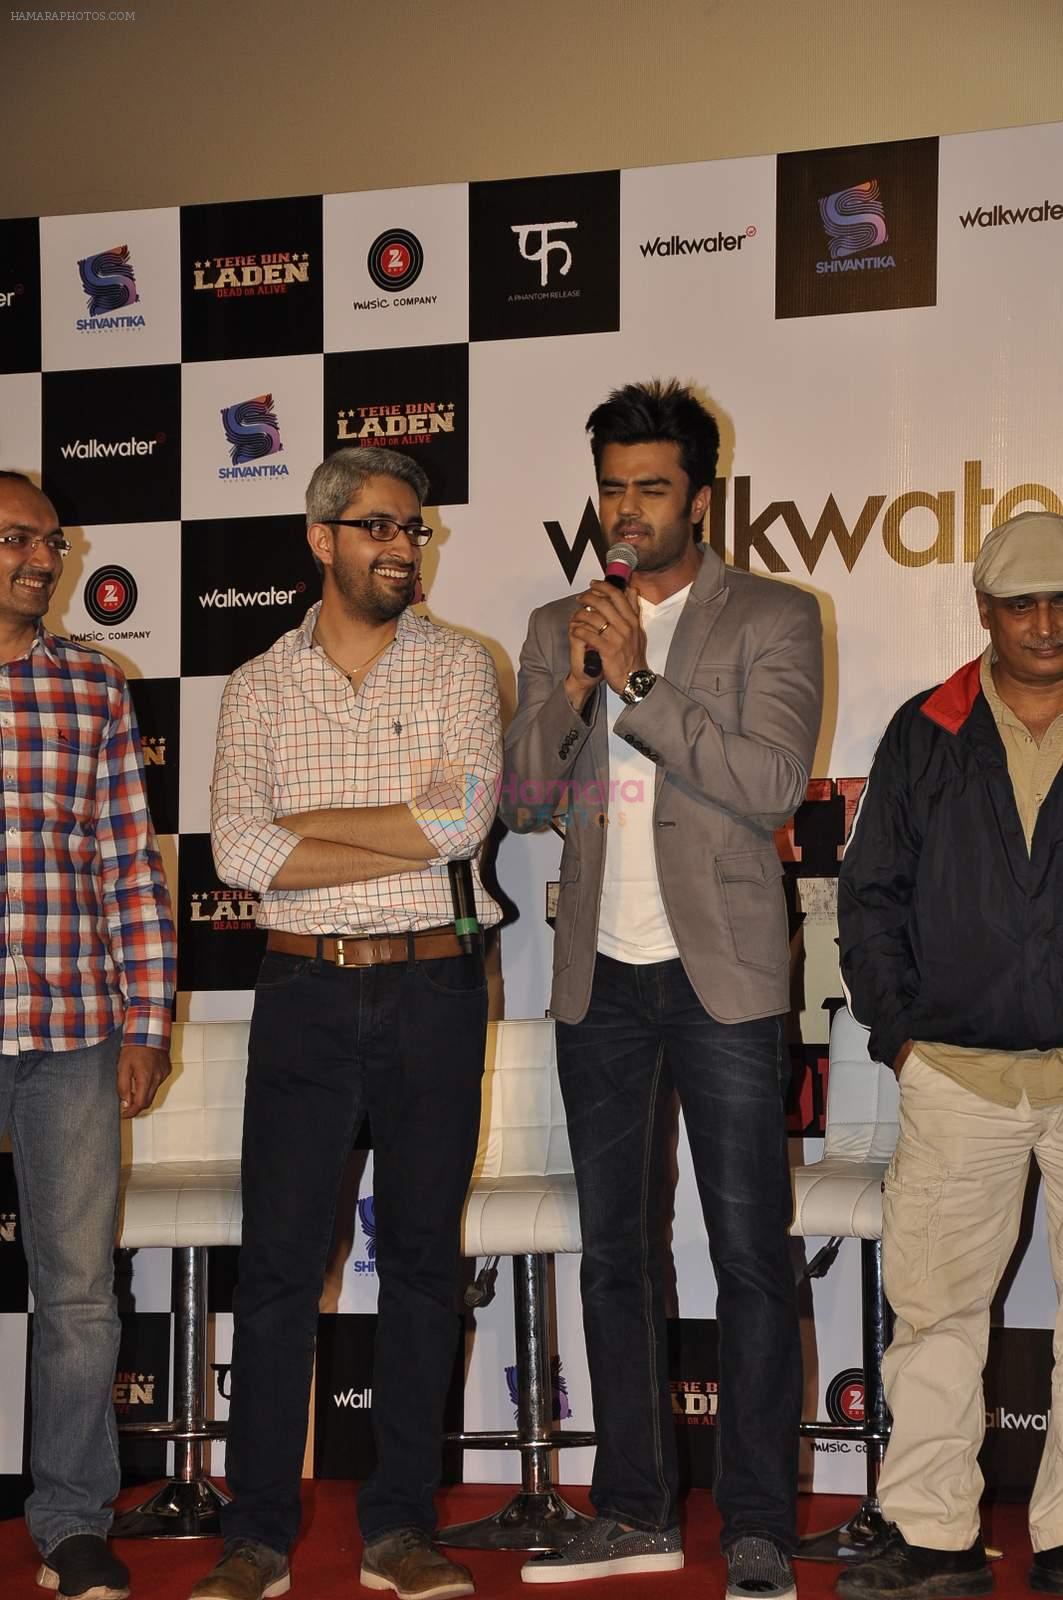 Manish Paul at the trailor launch of Tere Bin Laden Dead or Alive on 19th Jan 2016